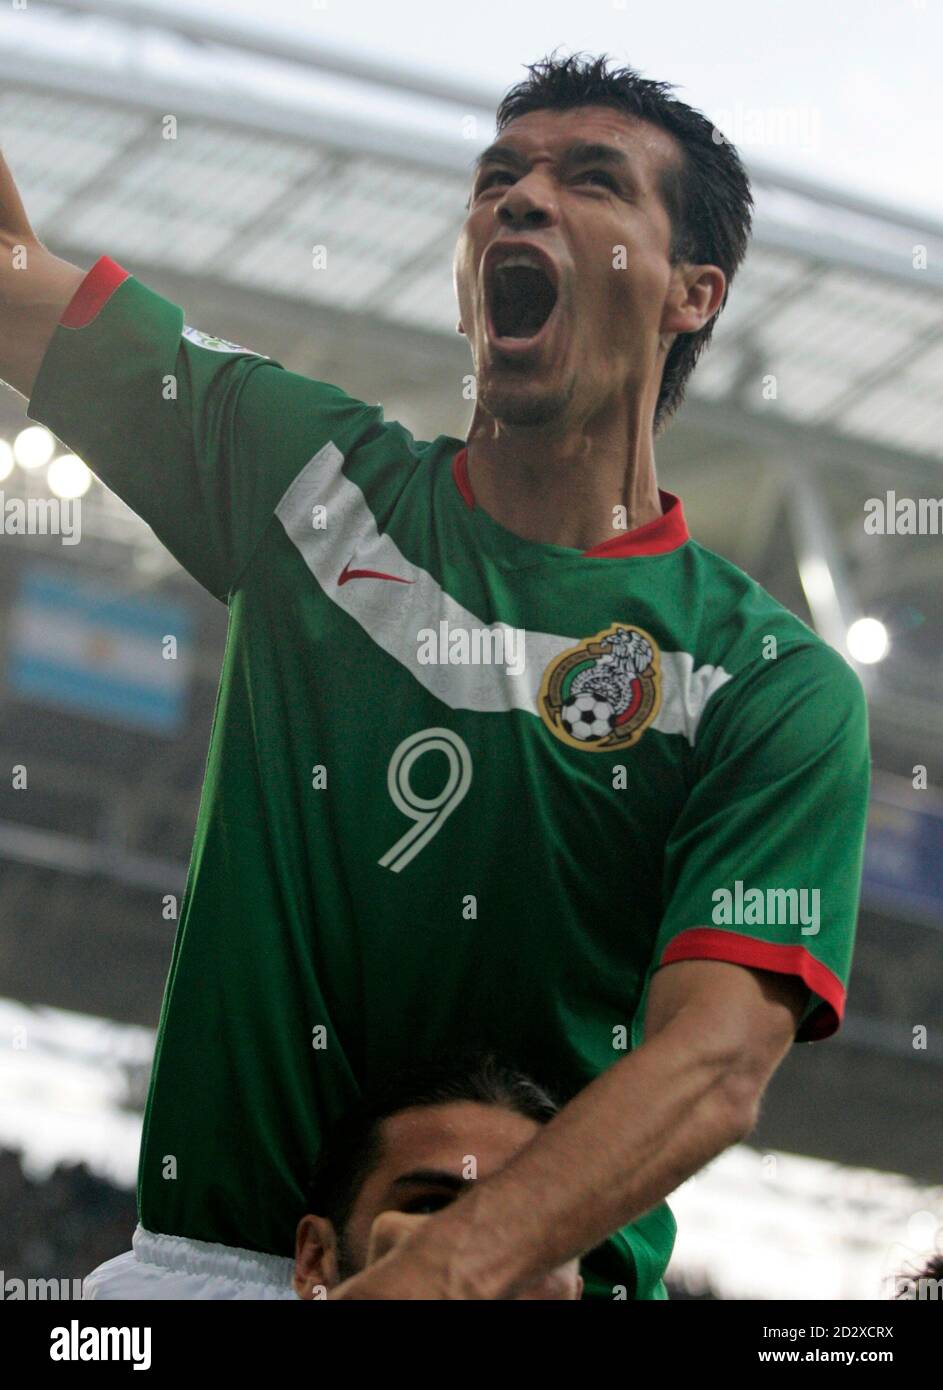 Mexico's Jared Borgetti celebrates after Rafael Marquez scored his team's  first goal against Argentina during their second round World Cup 2006 soccer  match in Leipzig June 24, 2006. FIFA RESTRICTION - NO